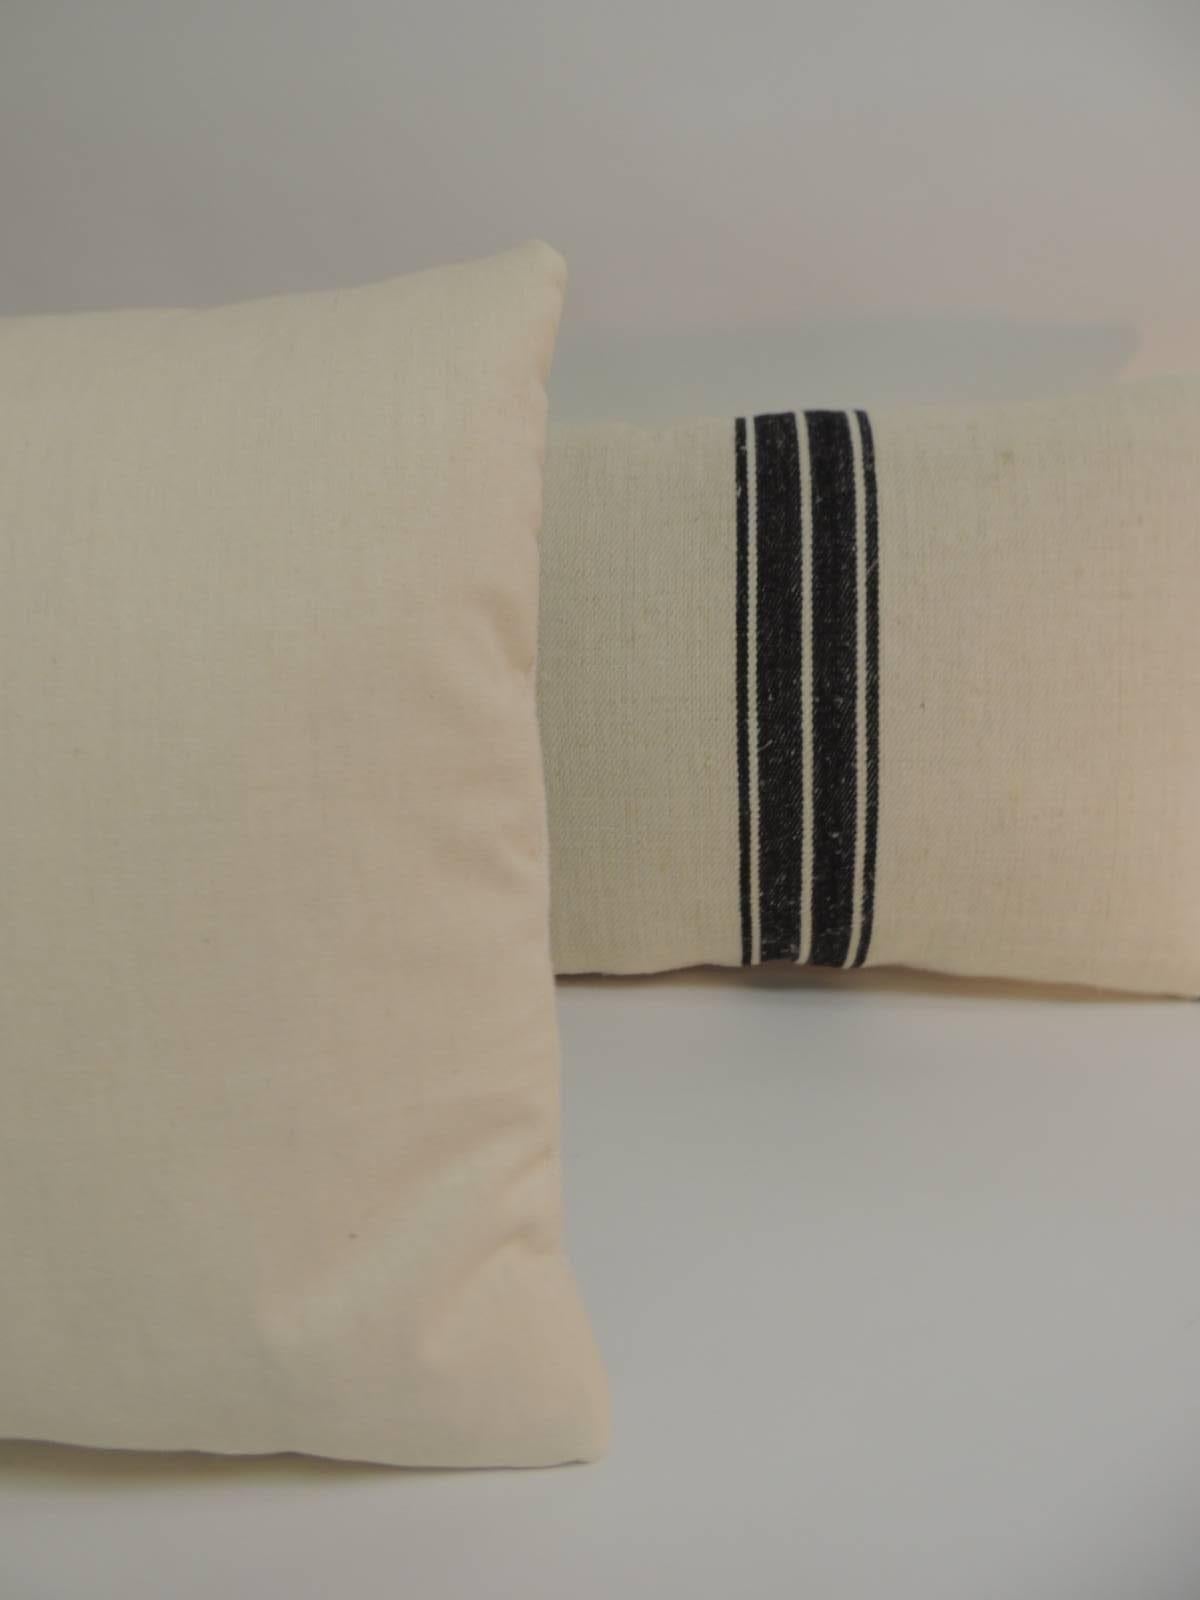 Hand-Crafted Pair of French Black & Natural Woven Grain Sack Stripes Decorative Pillows